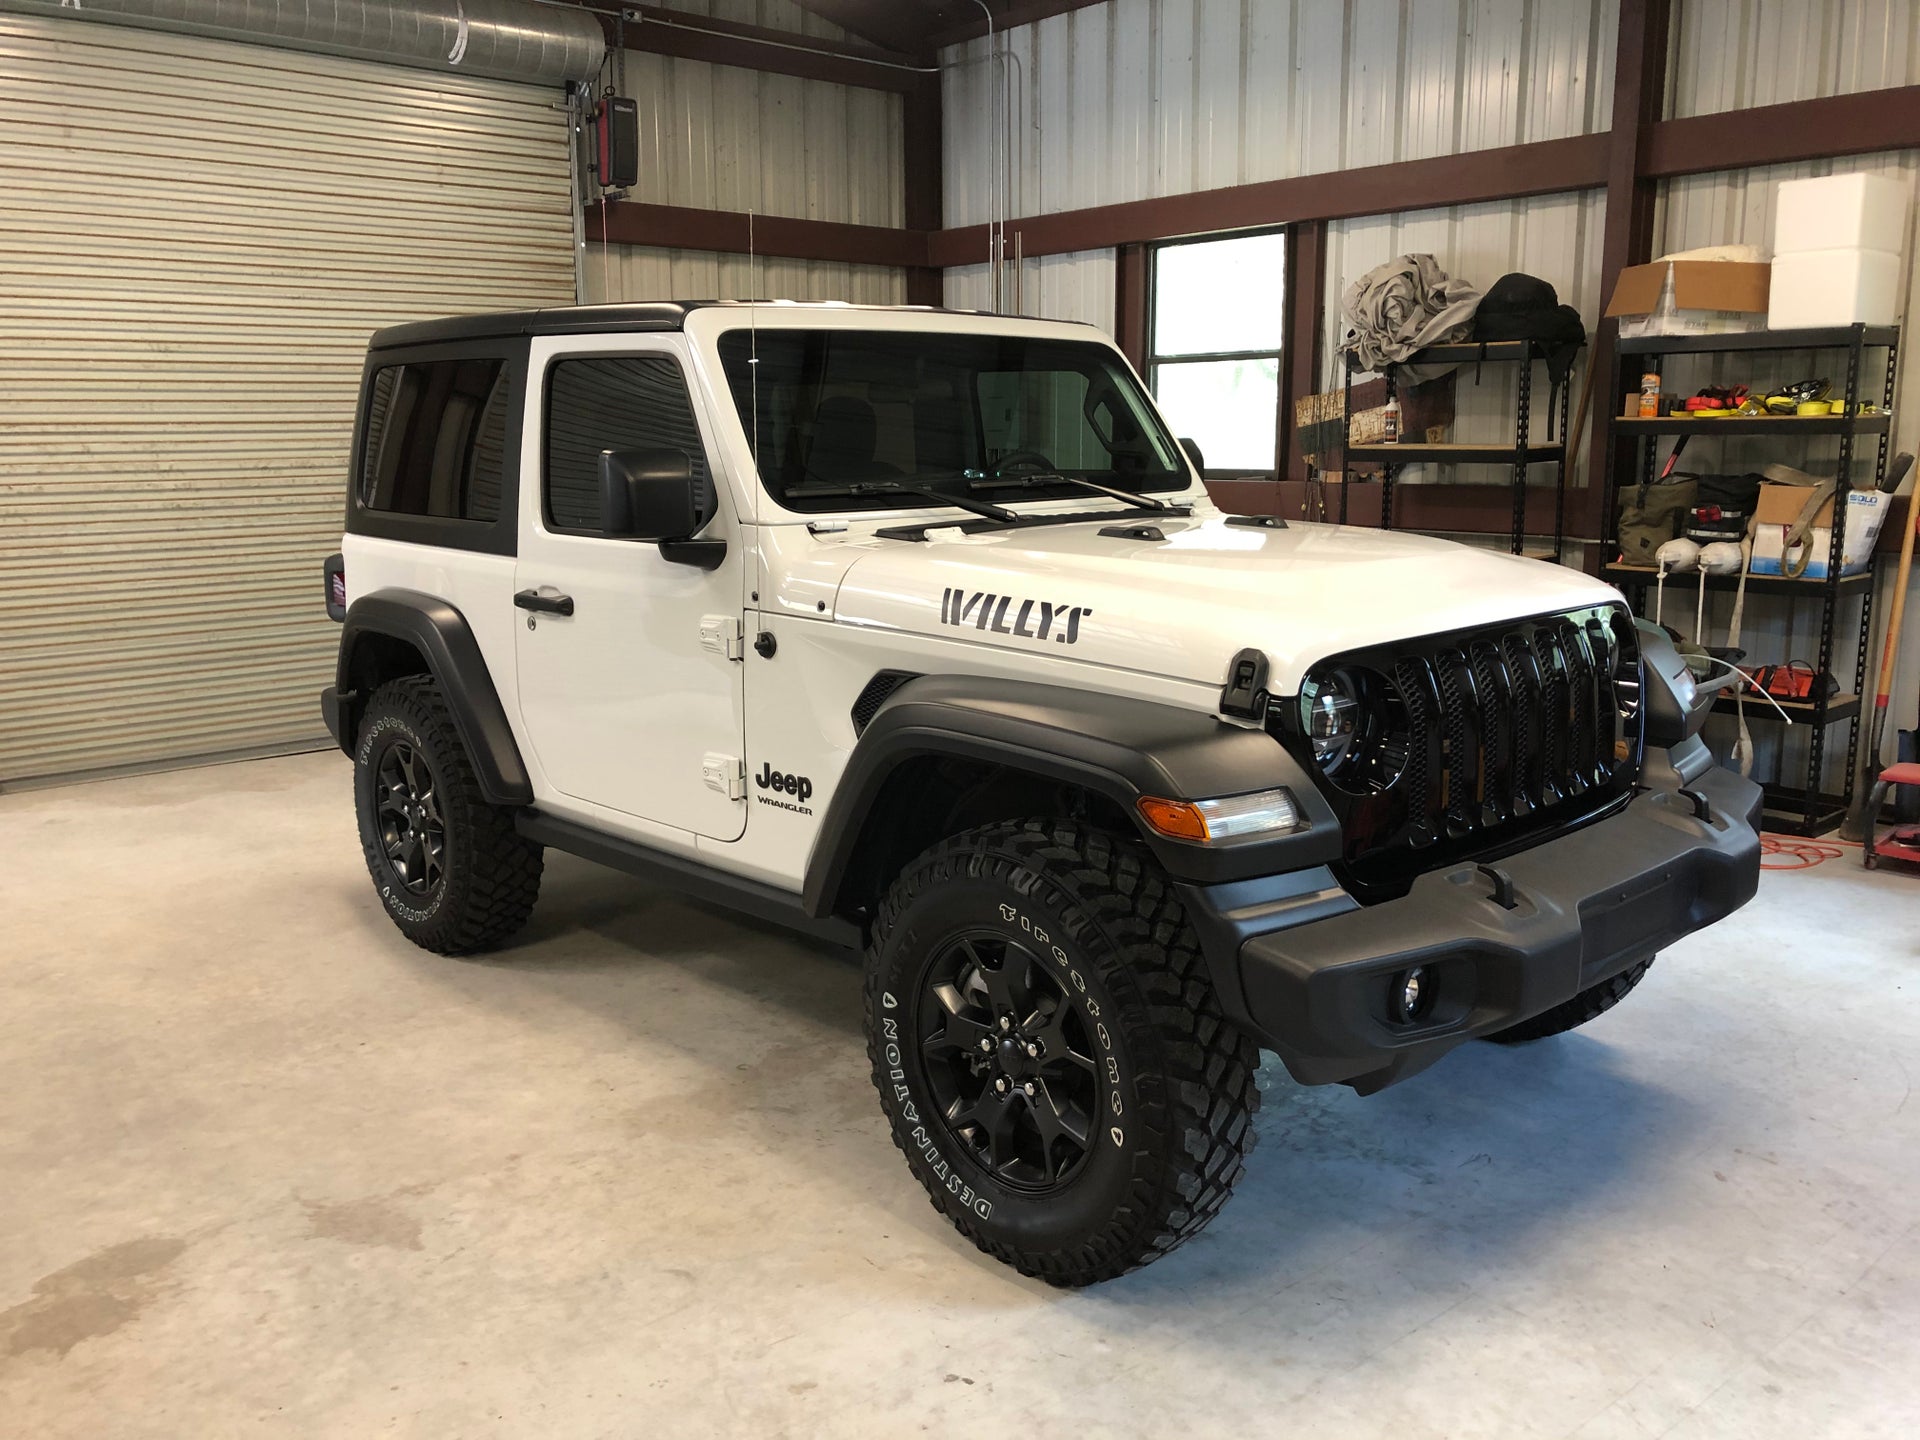 Bought a 2020 Willys Today | Jeep Wrangler Forum